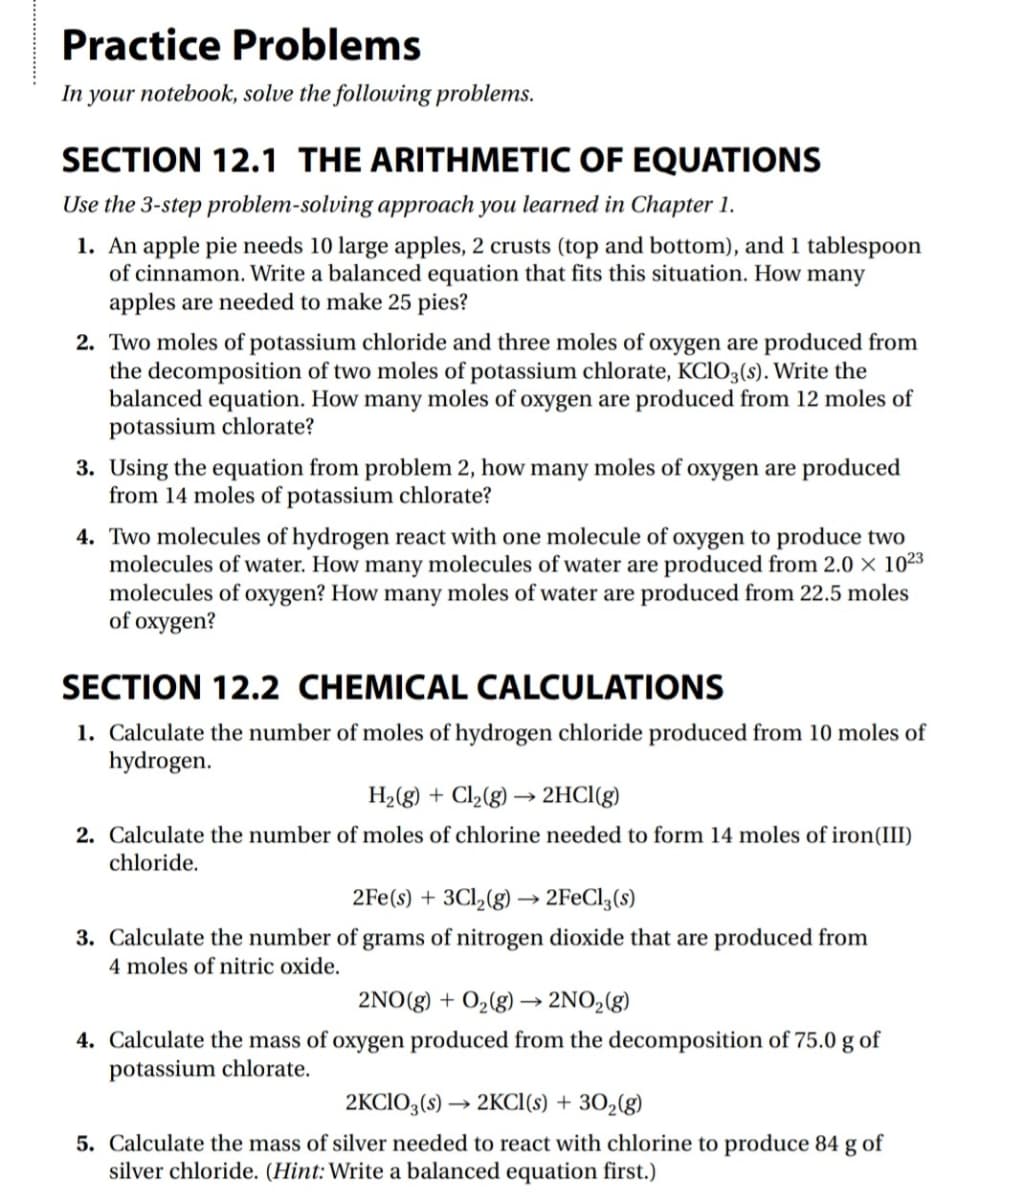 Practice Problems
In your notebook, solve the following problems.
SECTION 12.1 THE ARITHMETIC OF EQUATIONS
Use the 3-step problem-solving approach you learned in Chapter 1.
1. An apple pie needs 10 large apples, 2 crusts (top and bottom), and 1 tablespoon
of cinnamon. Write a balanced equation that fits this situation. How many
apples are needed to make 25 pies?
2. Two moles of potassium chloride and three moles of oxygen are produced from
the decomposition of two moles of potassium chlorate, KCIO3(s). Write the
balanced equation. How many moles of oxygen are produced from 12 moles of
potassium chlorate?
3. Using the equation from problem 2, how many moles of oxygen are produced
from 14 moles of potassium chlorate?
4. Two molecules of hydrogen react with one molecule of oxygen to produce two
molecules of water. How many molecules of water are produced from 2.0 × 1023
molecules of oxygen? How many moles of water are produced from 22.5 moles
of oxygen?
SECTION 12.2 CHEMICAL CALCULATIONS
1. Calculate the number of moles of hydrogen chloride produced from 10 moles of
hydrogen.
H2(g) + Cl2(g) → 2HCI(g)
2. Calculate the number of moles of chlorine needed to form 14 moles of iron(III)
chloride.
2Fe(s) + 3Cl,(g) → 2F€CI3(s)
3. Calculate the number of grams of nitrogen dioxide that are produced from
4 moles of nitric oxide.
2NO(g) + O2(g) → 2NO,(g)
4. Calculate the mass of oxygen produced from the decomposition of 75.0 g of
potassium chlorate.
2KCIO3,(s) → 2KCI(s) + 30,(g)
5. Calculate the mass of silver needed to react with chlorine to produce 84 g of
silver chloride. (Hint: Write a balanced equation first.)
